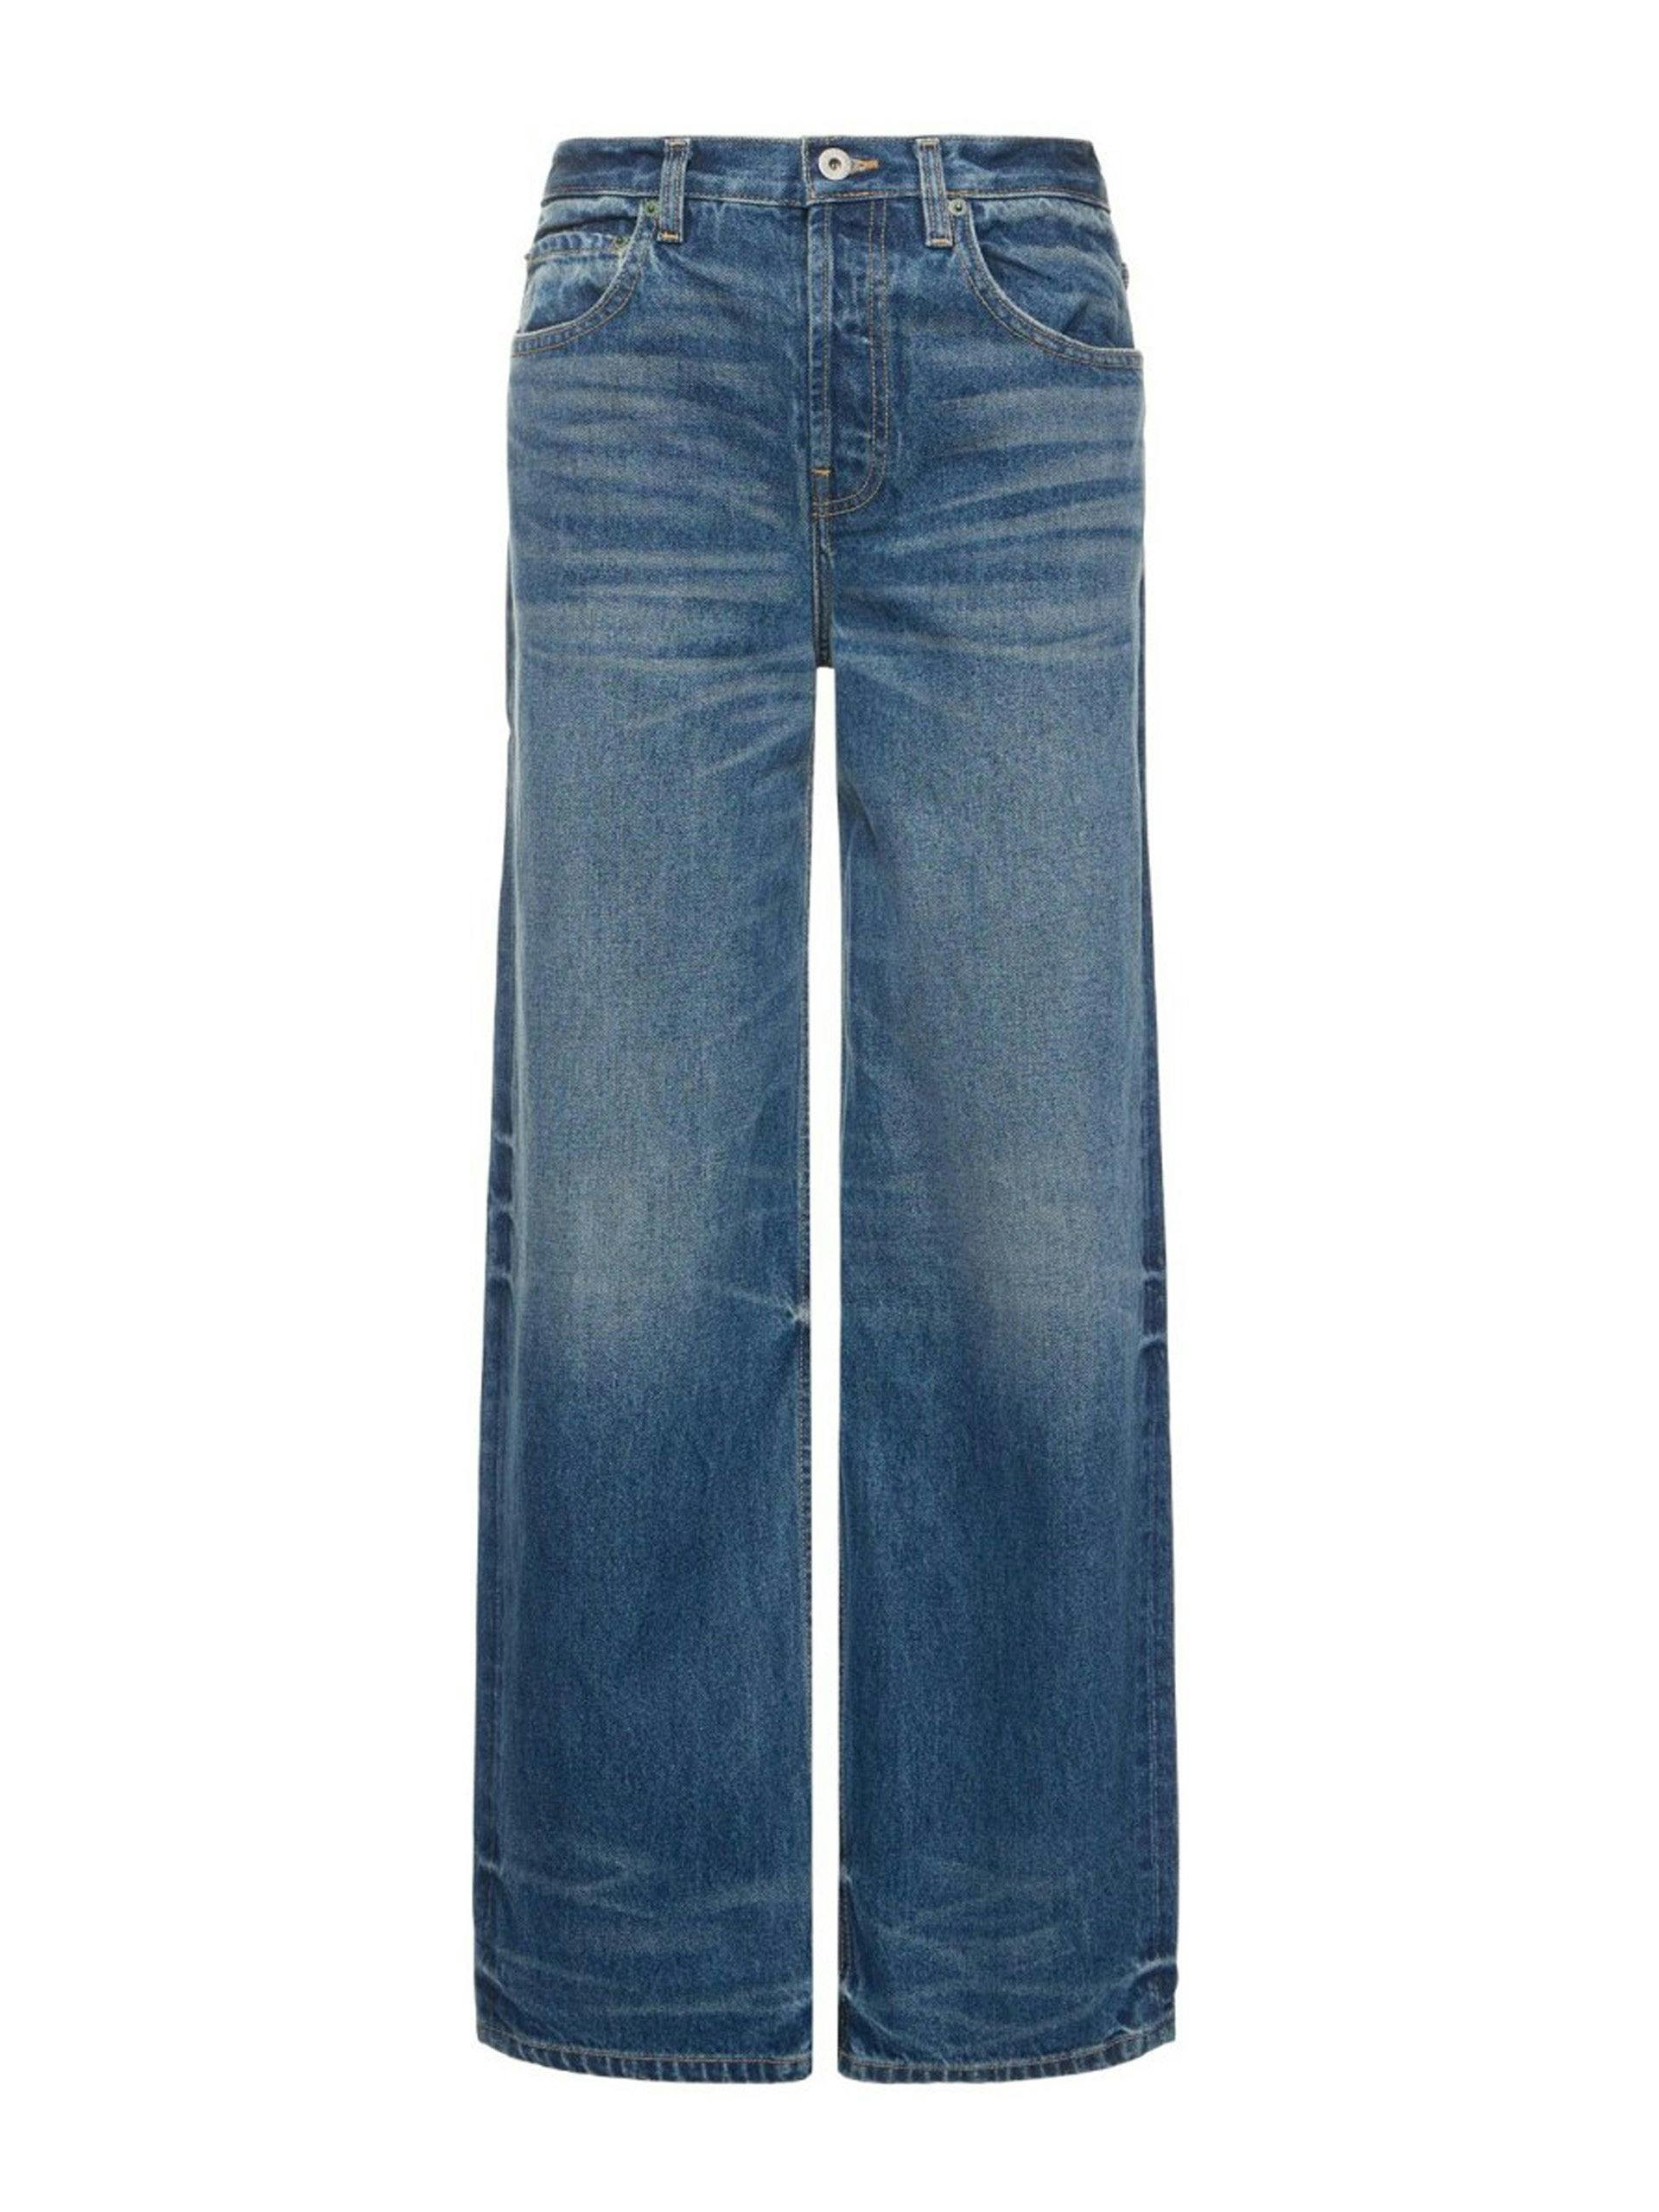 The Remy cotton denim straight jeans